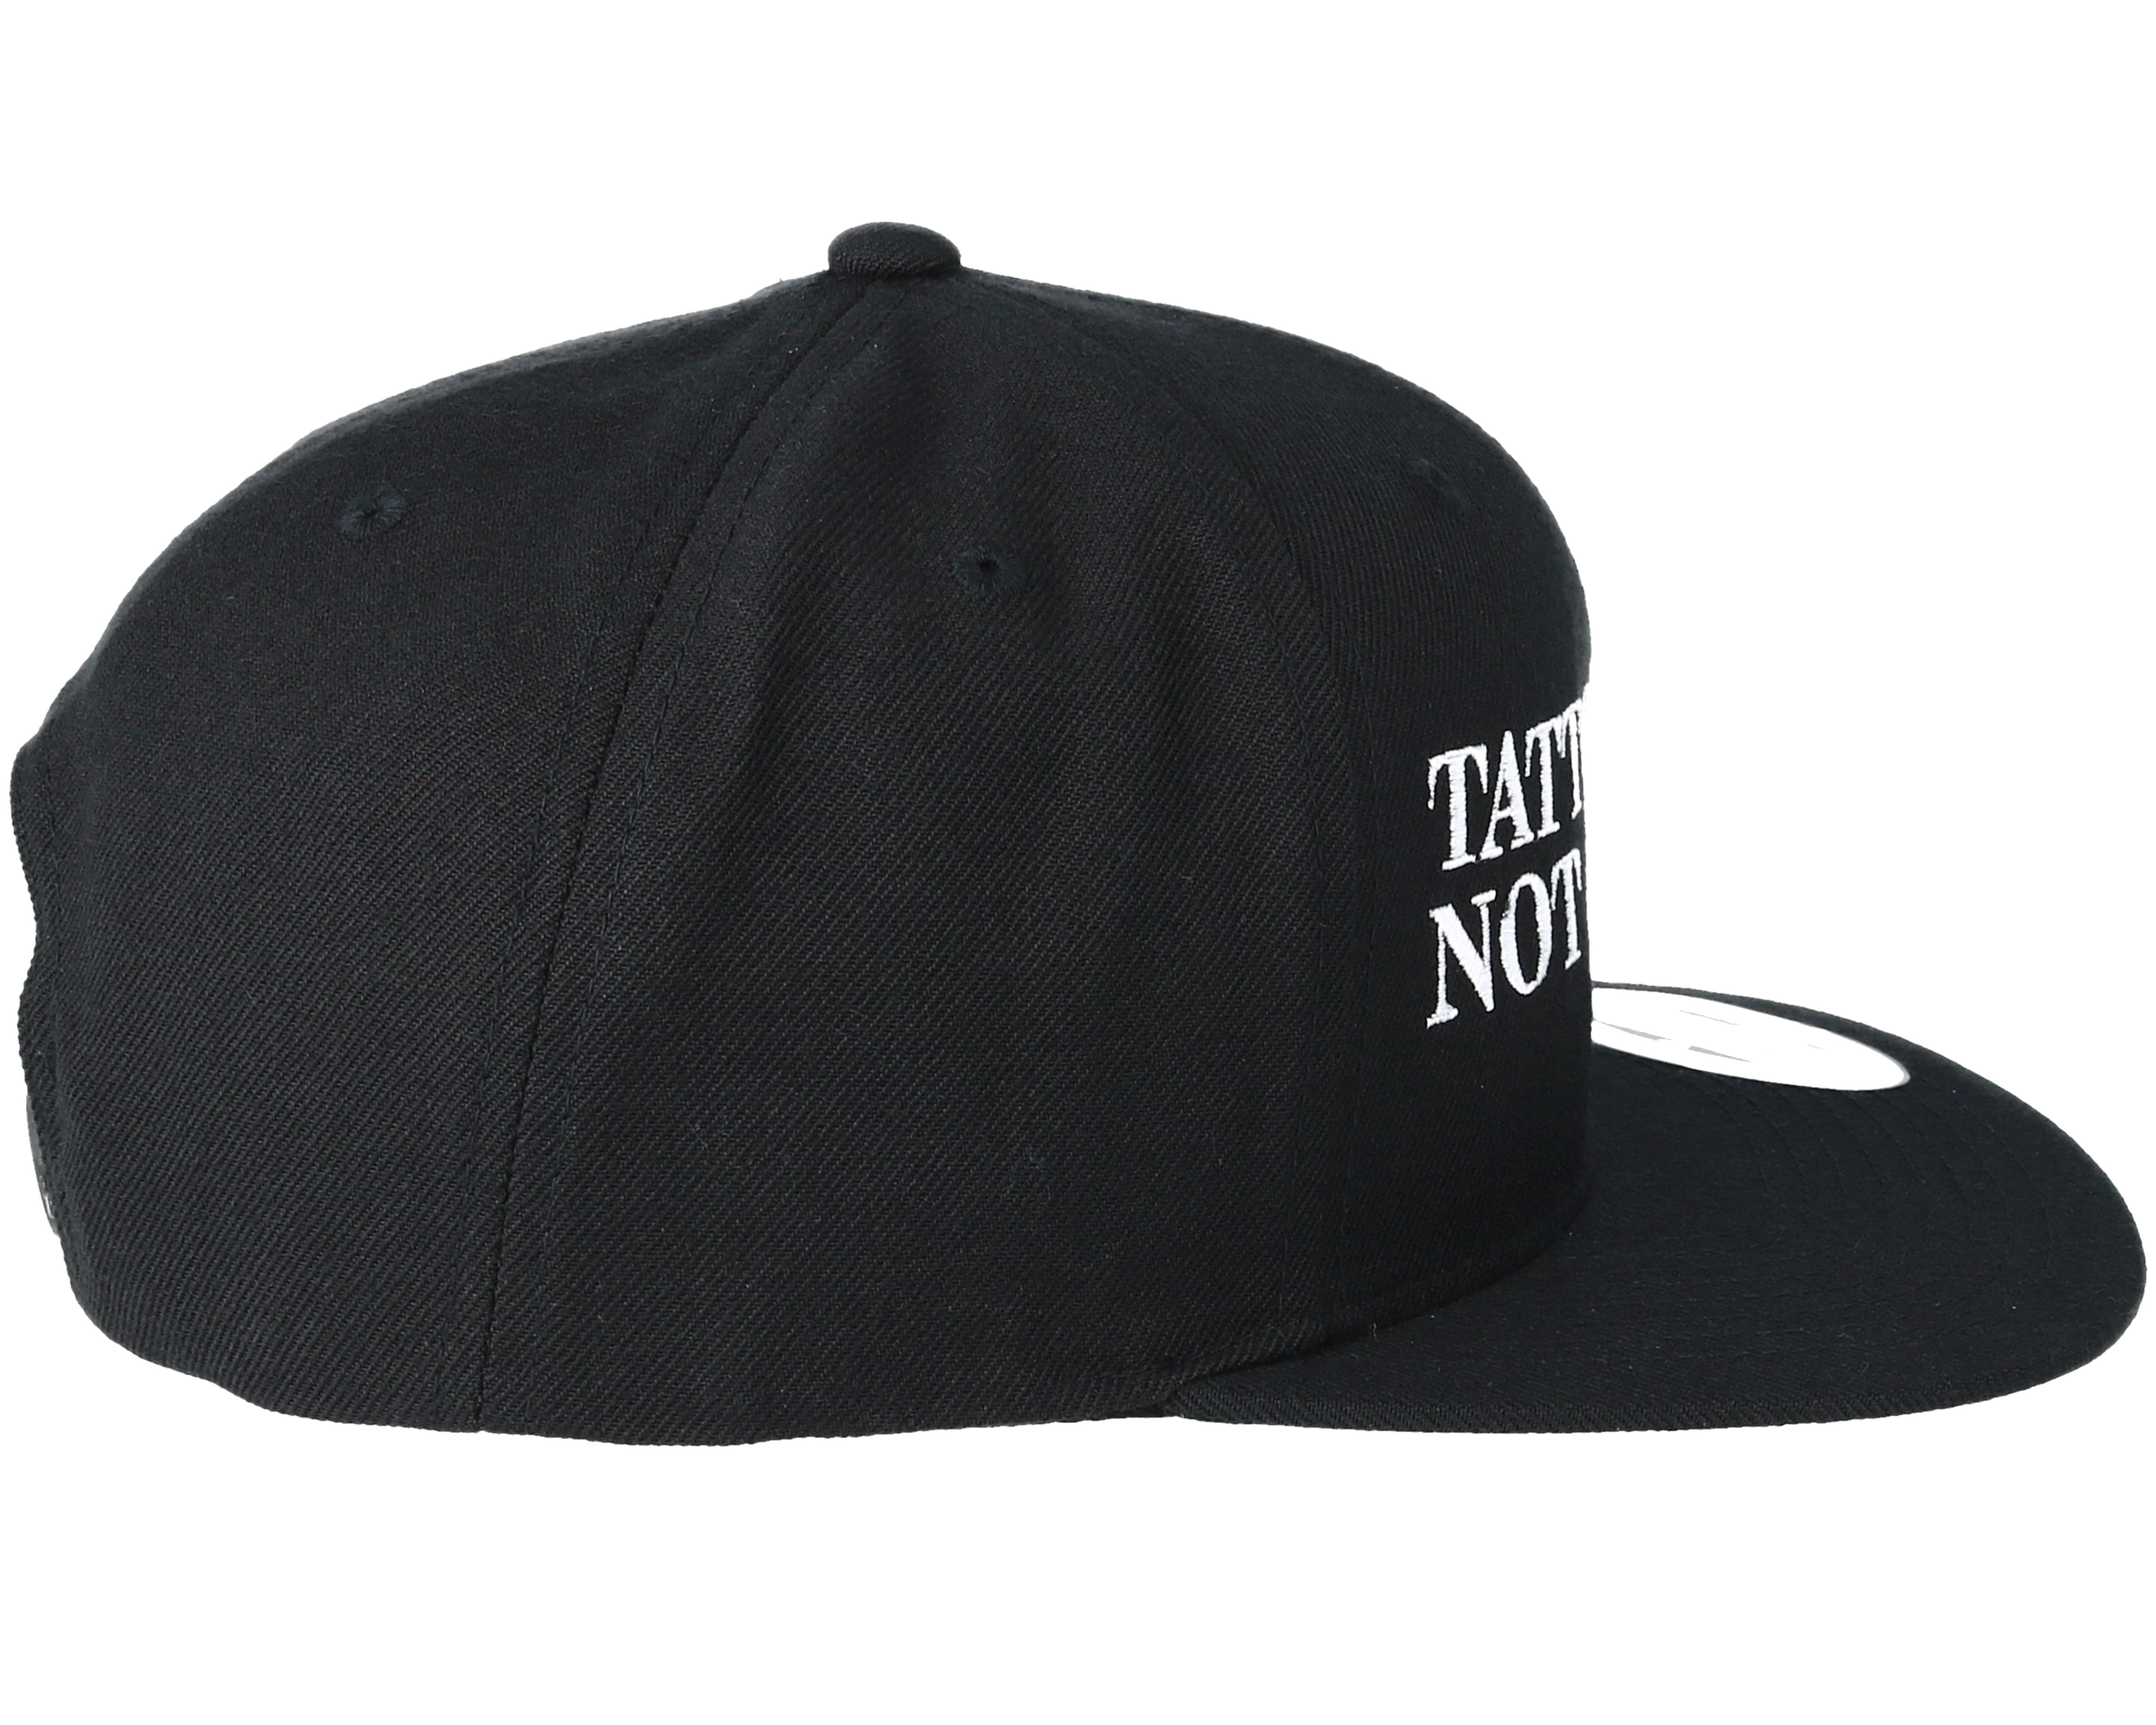 Tattoos Are Not A Crime Black Snapback - Tattoo Collective caps ...